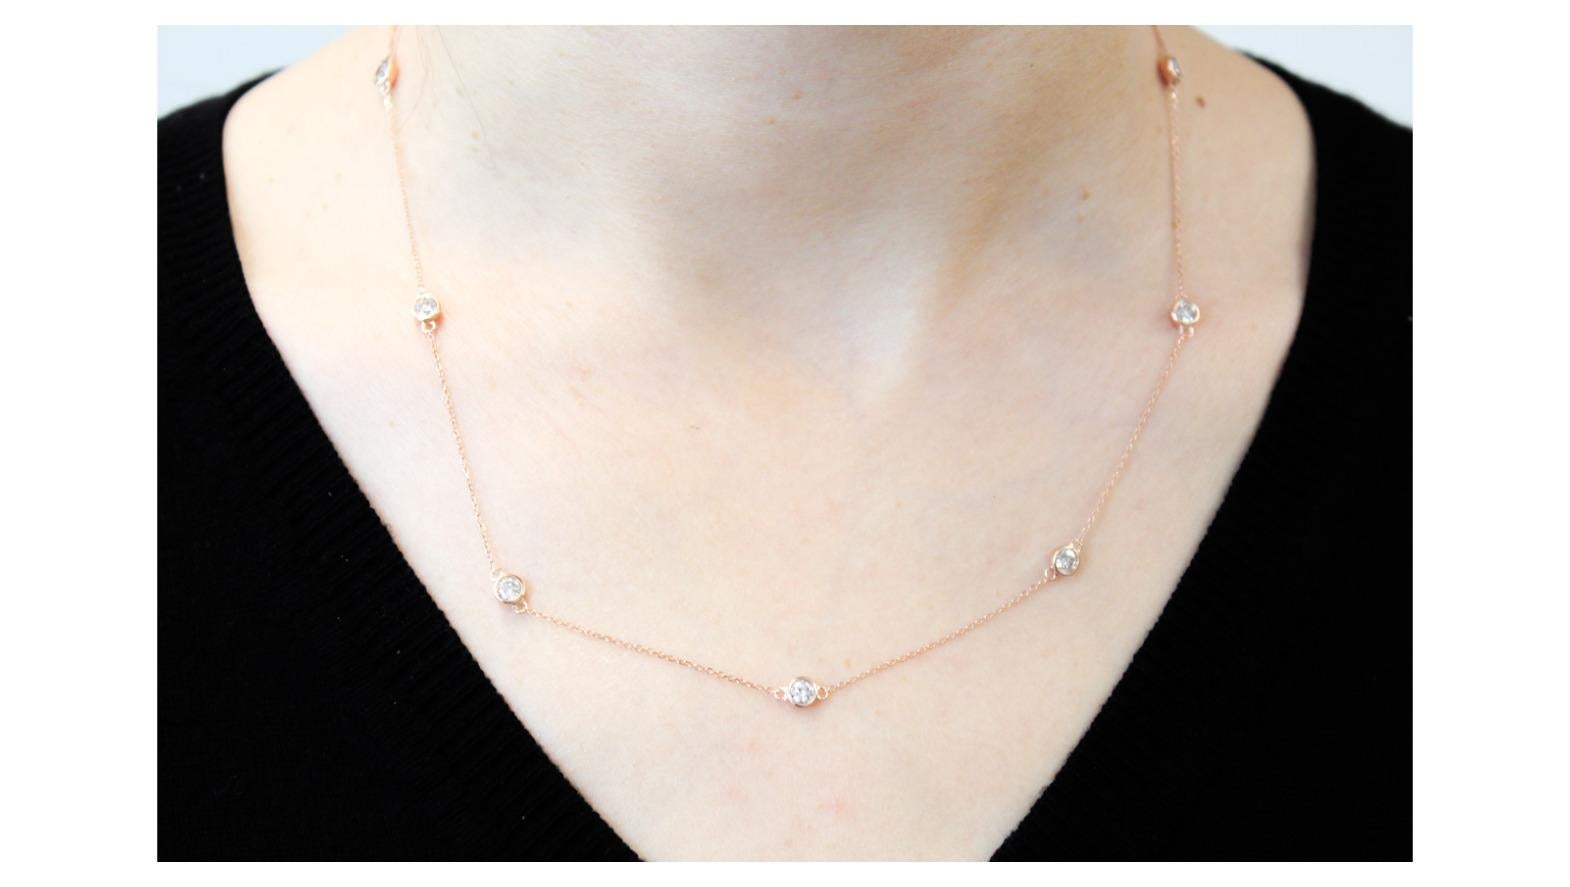 A gorgeous diamond necklace will rarely go overlooked. This 18” piece is both rare and stunning. It includes bezels that set white round diamonds. There are 10 white diamonds that total 0.75 and are I-J color and I1/I2 clarity. This versatile